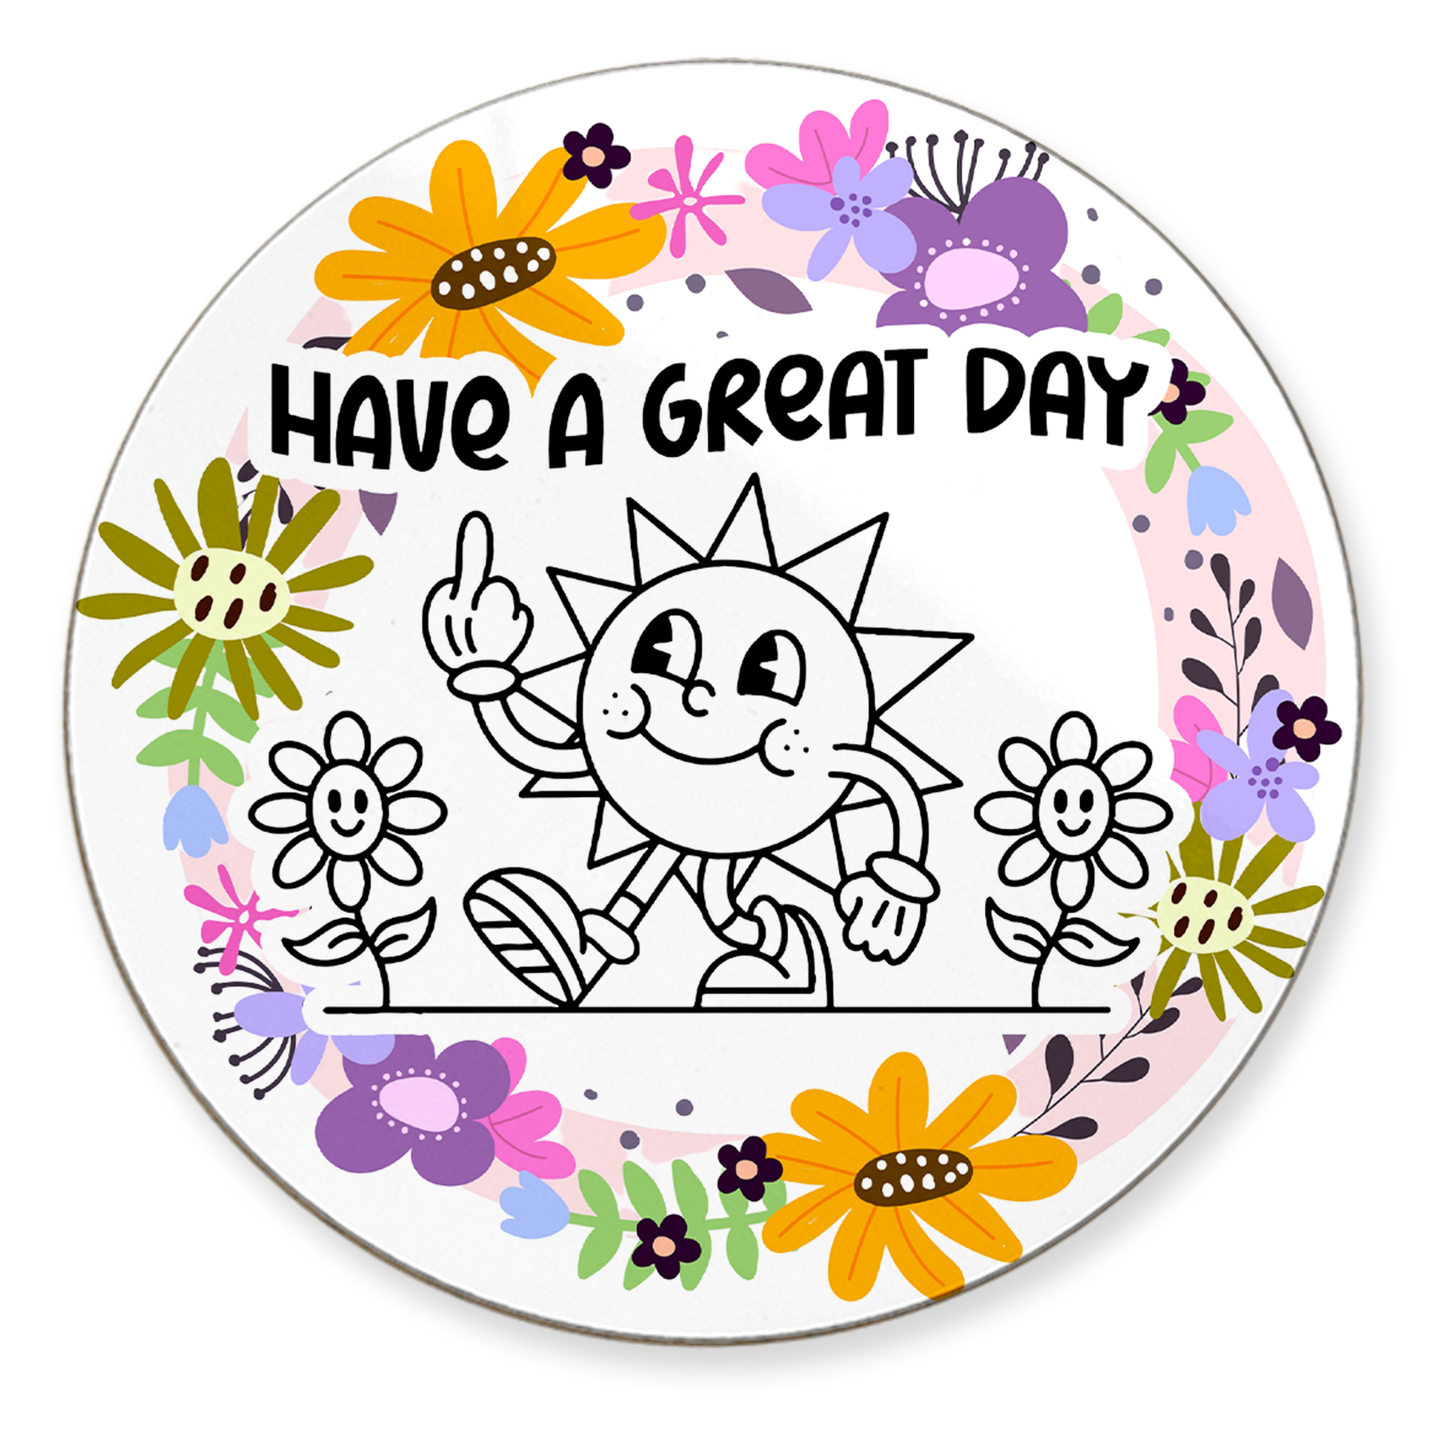 Have A Great Day Mousepad & Coaster Set